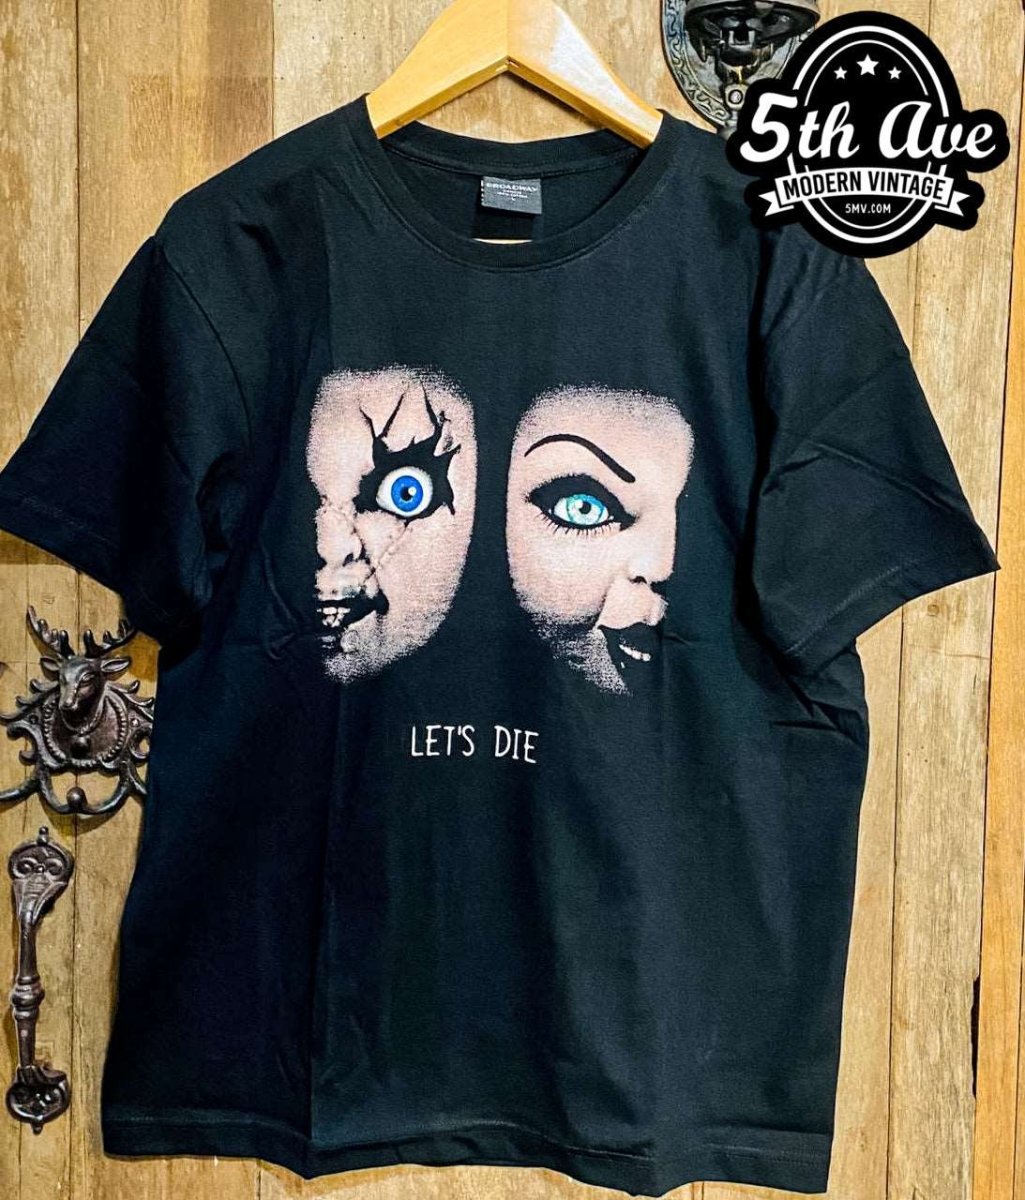 Chucky's Playtime Duo t shirt: Let's Die Edition - Vintage Band Shirts